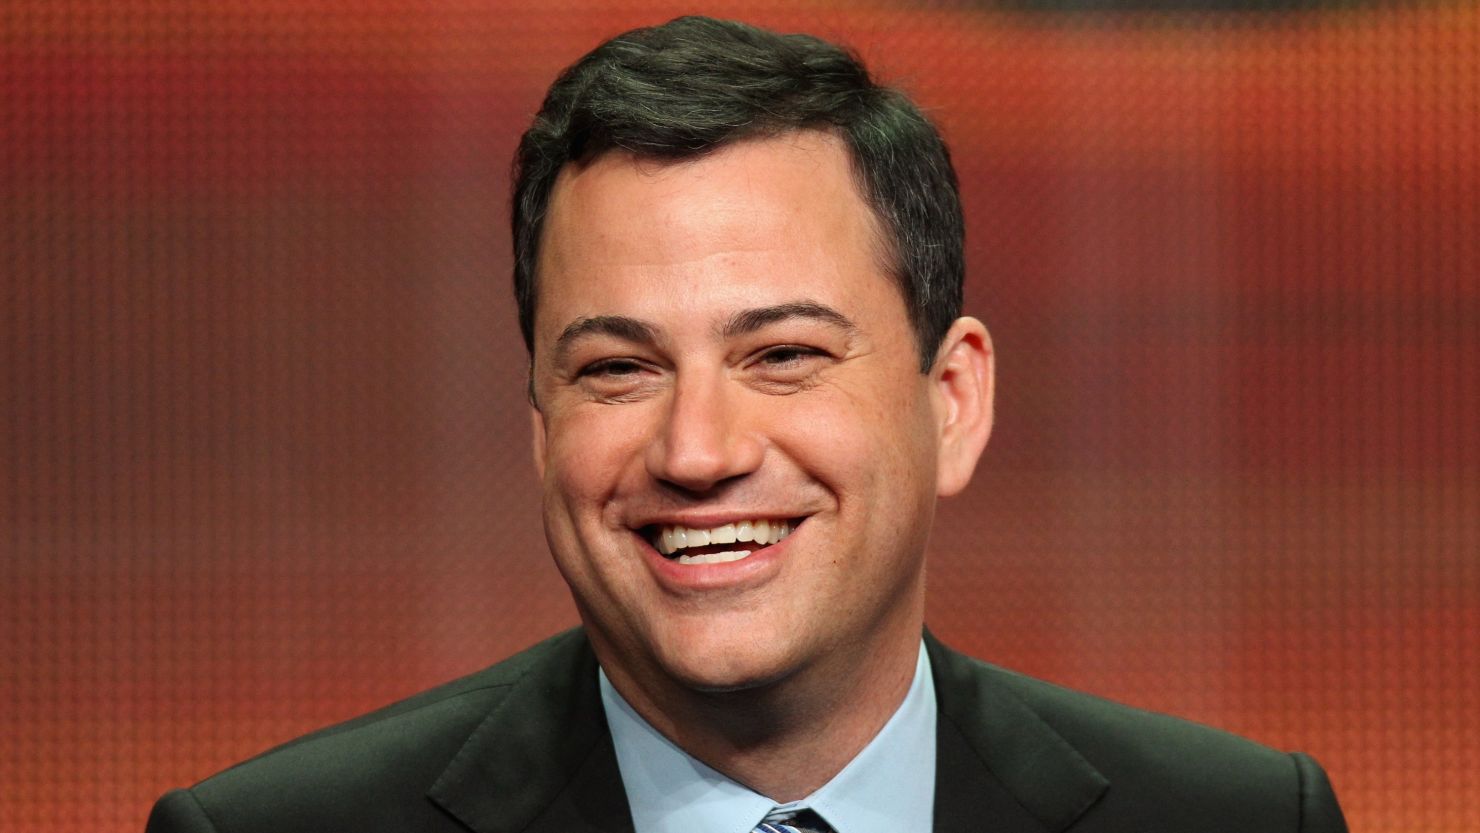 Jimmy Kimmel got pretty candid with a Rolling Stone interviewer.